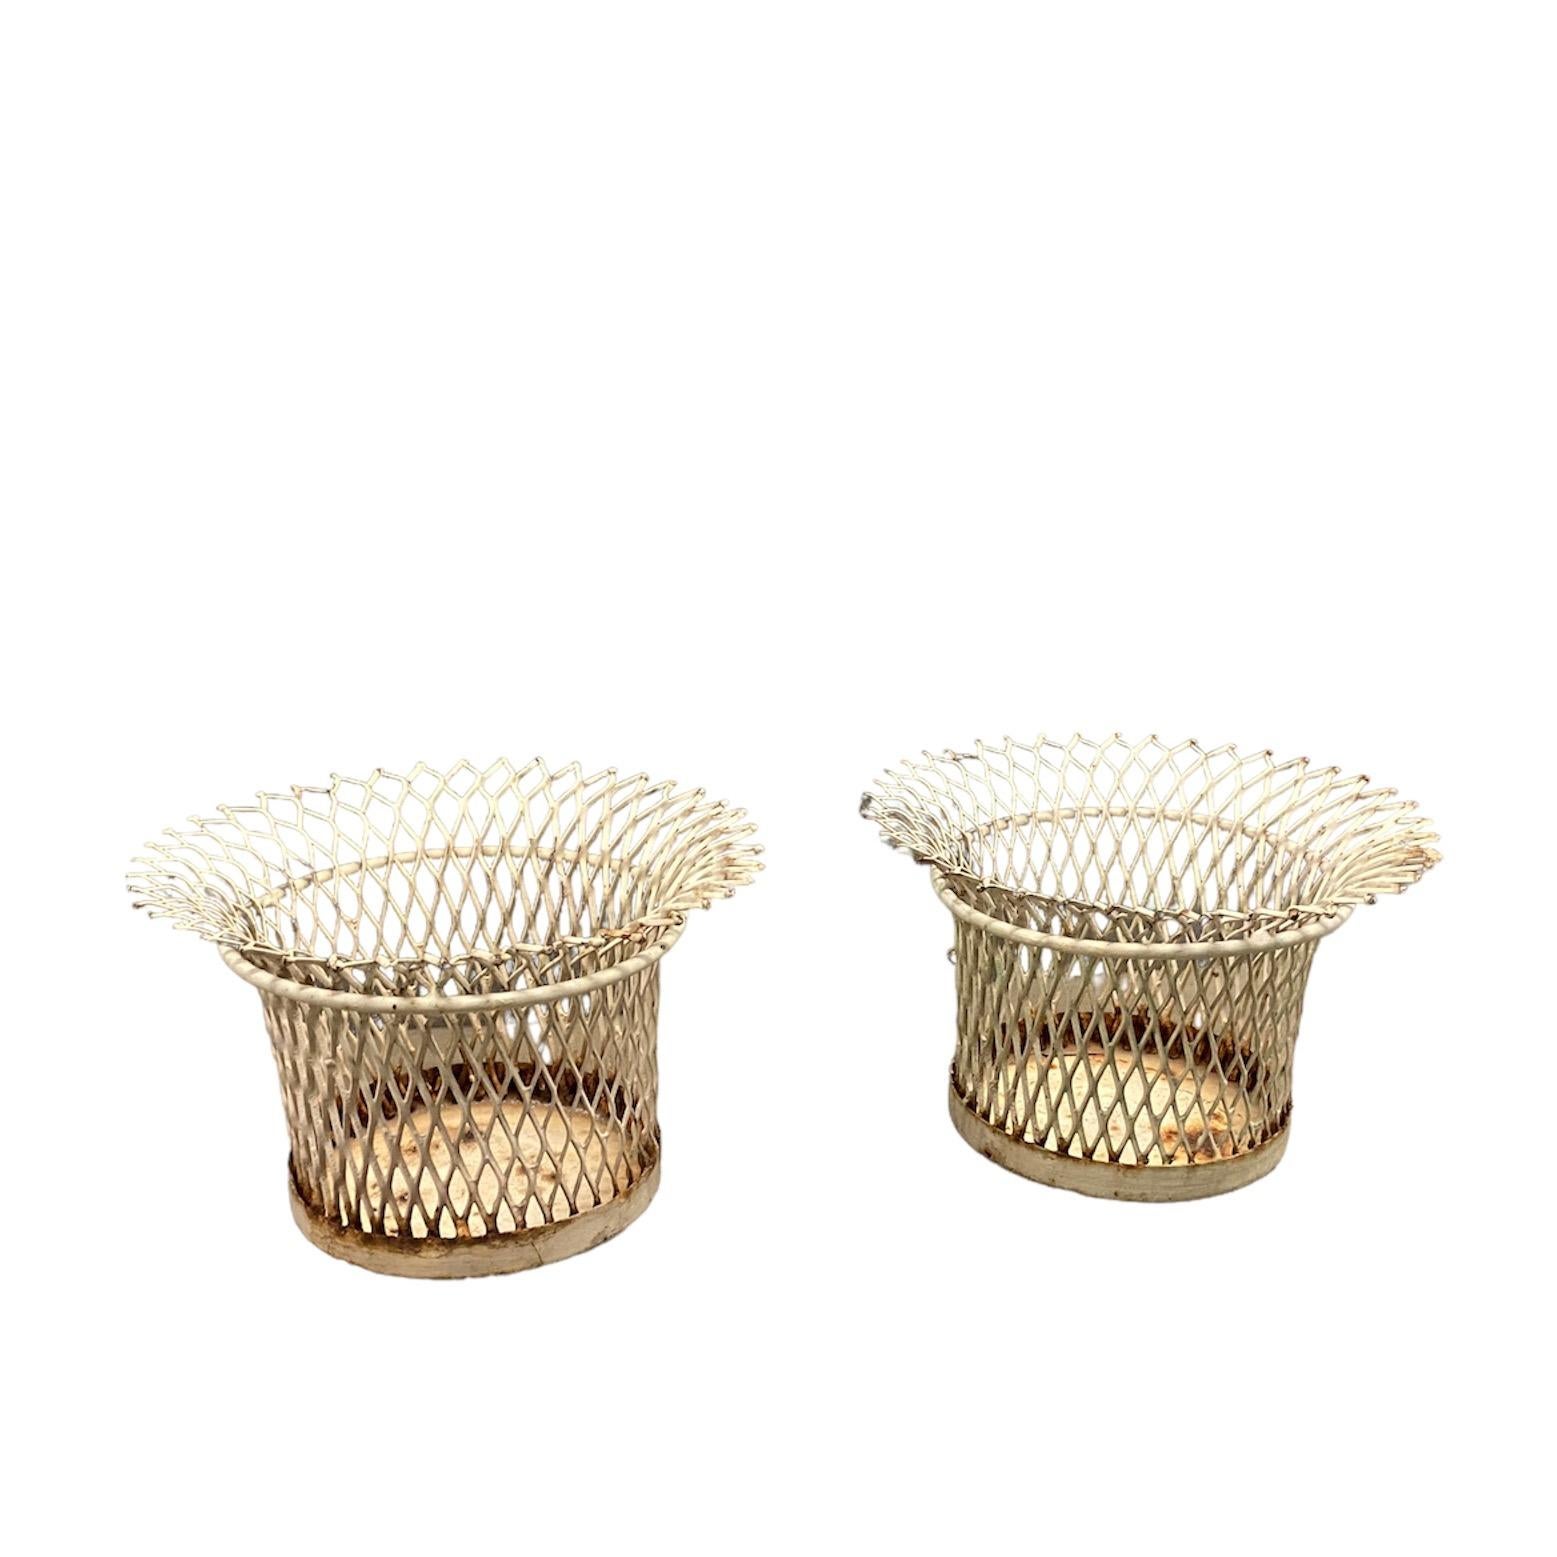 French 1950's Mathieu Mategot circular planters, white lacquered mesh, pair available For Sale